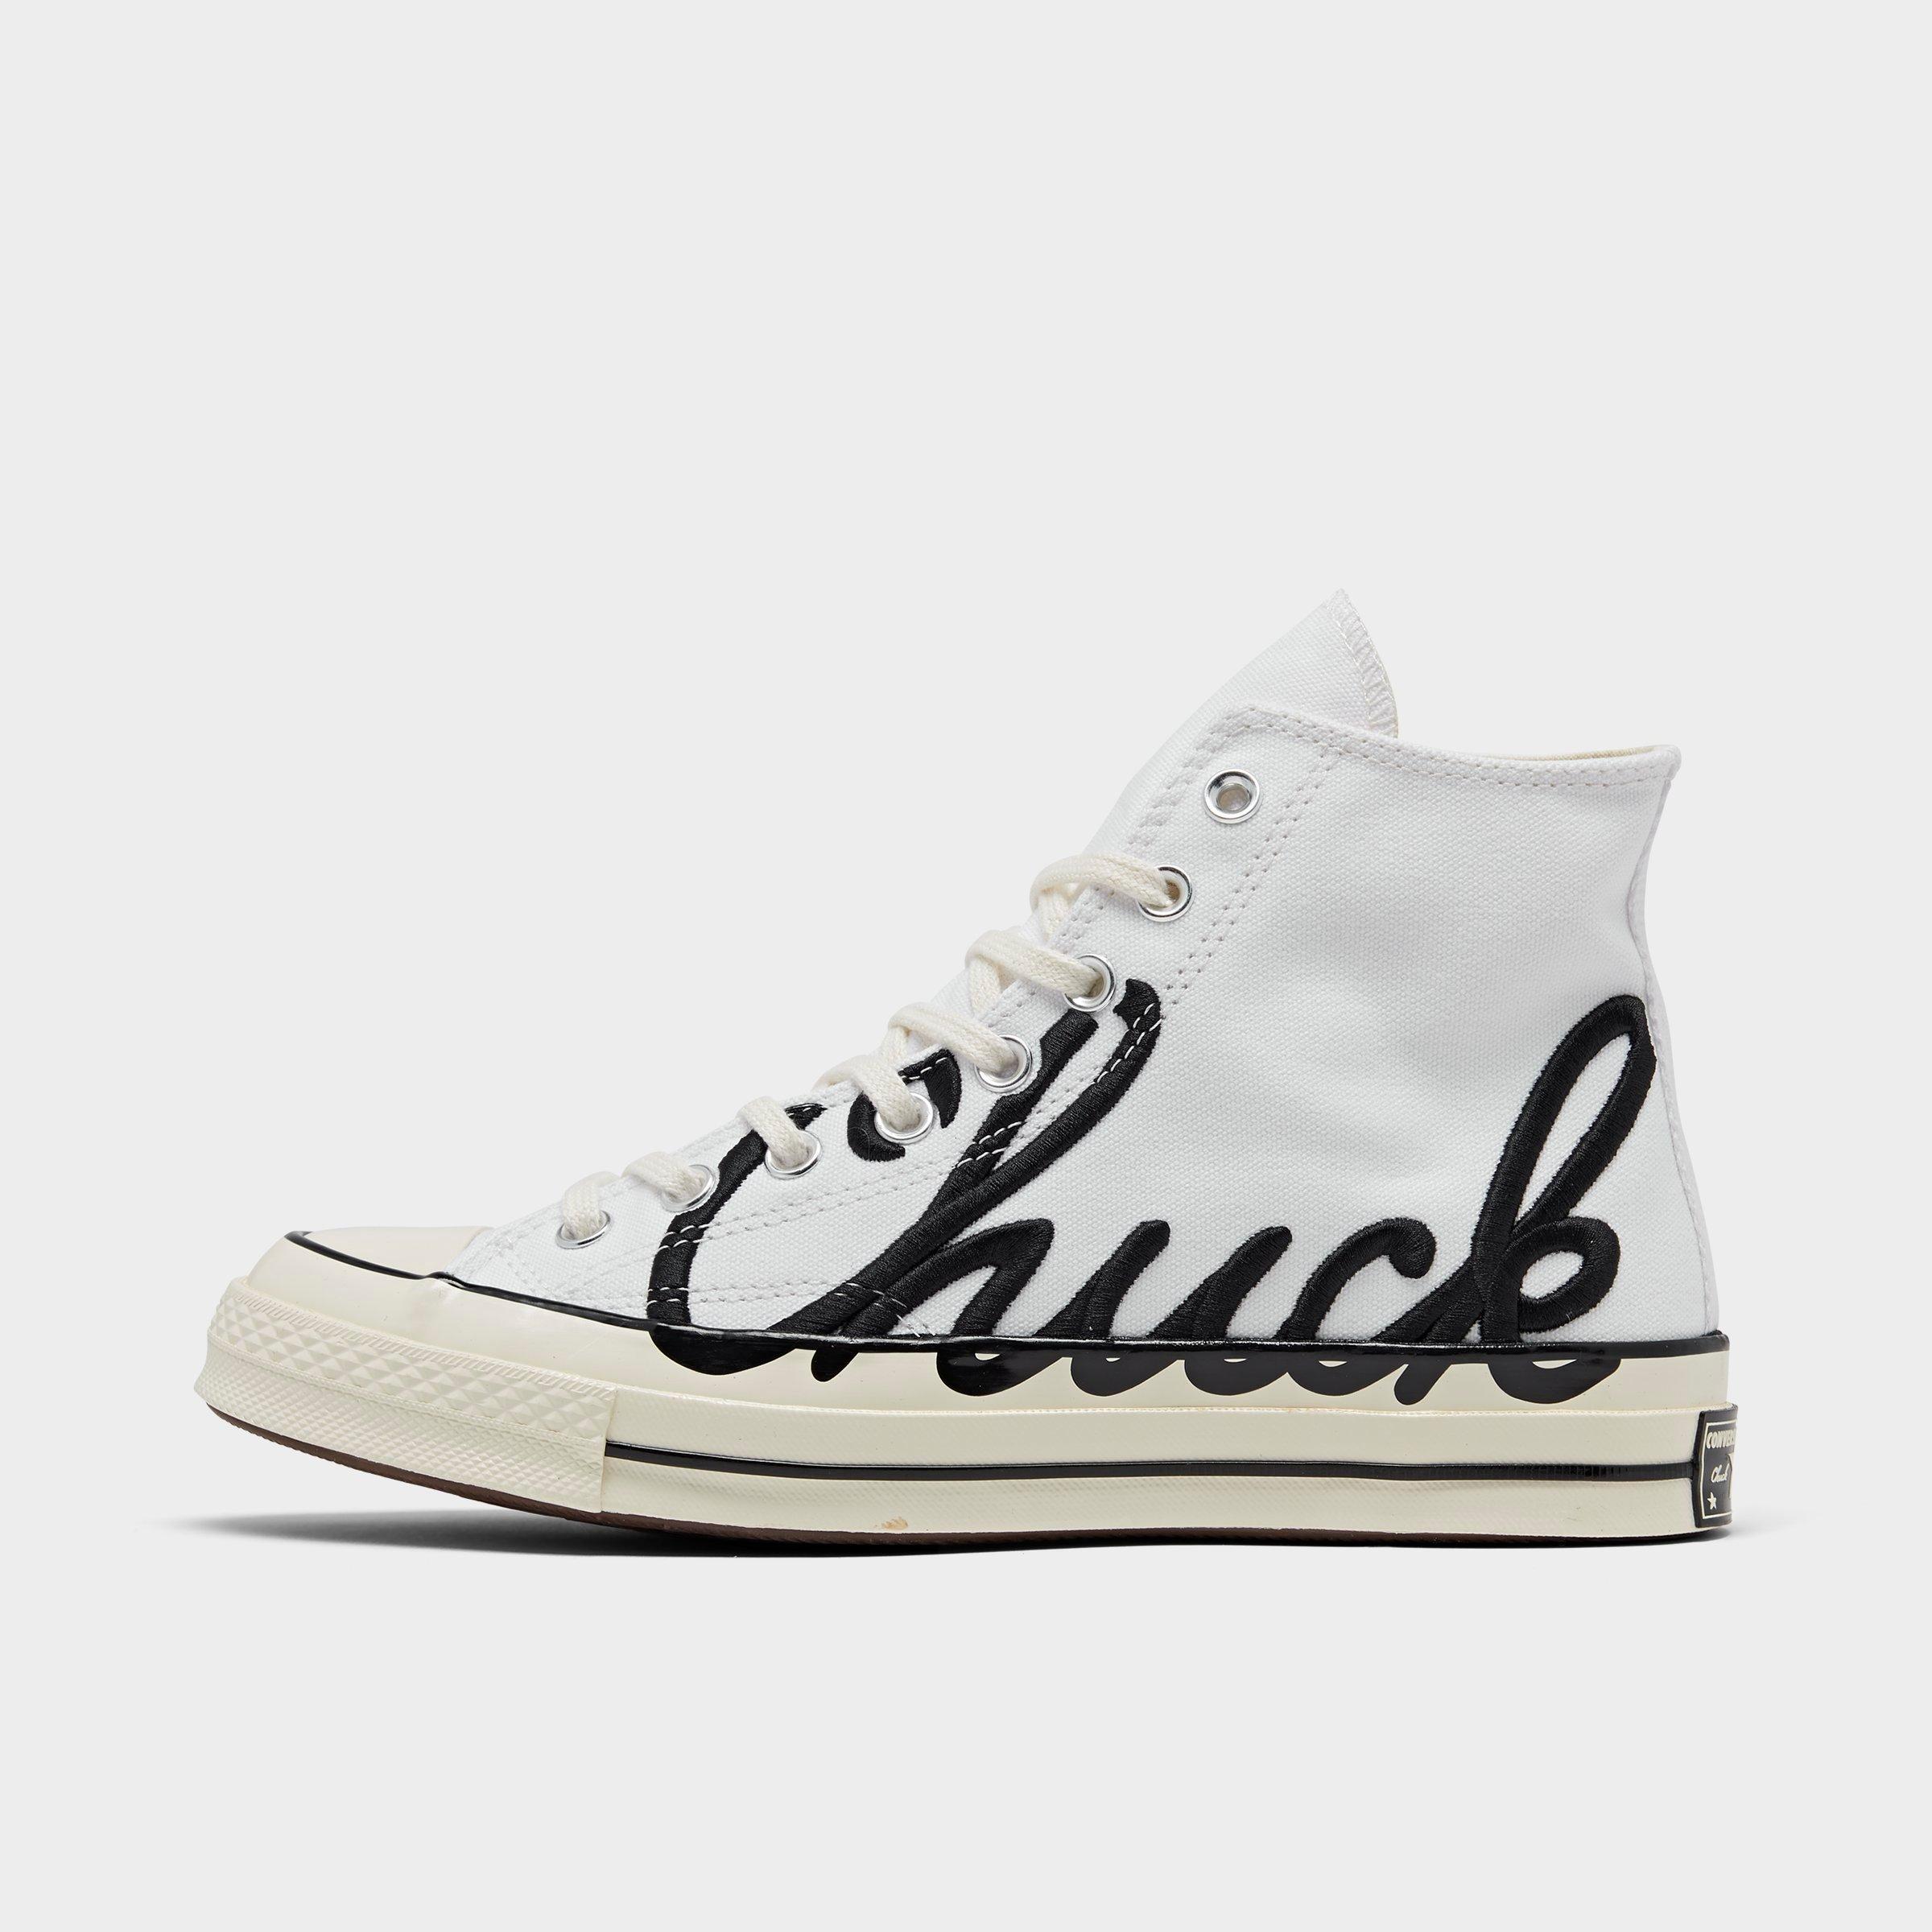 unisex converse chuck taylor all star 70 high top casual shoes